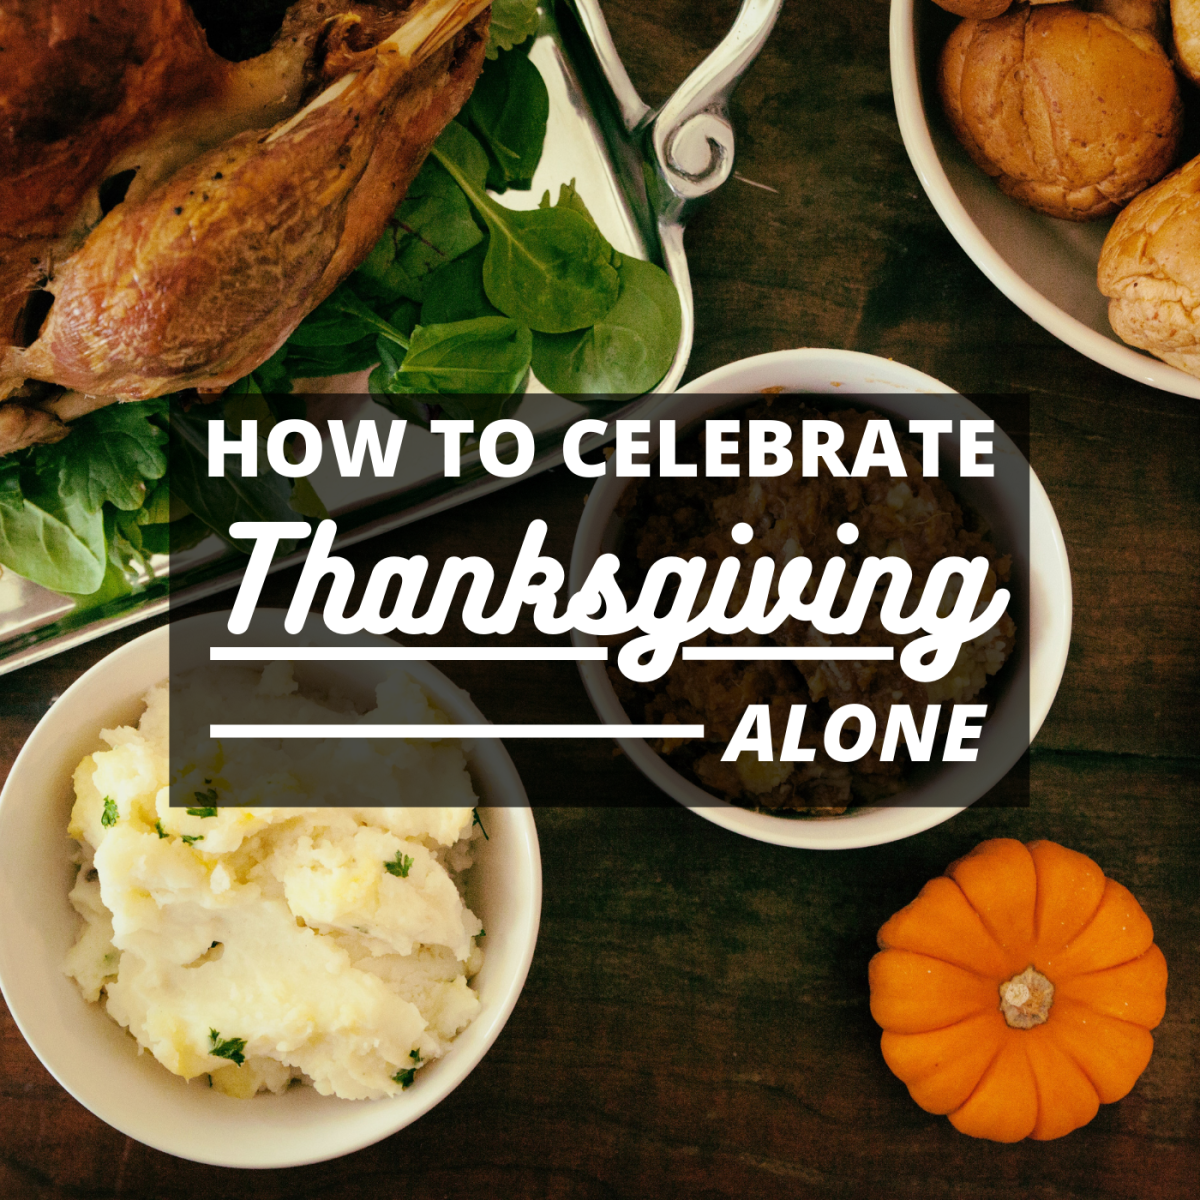 How to Make Thanksgiving Festive When Celebrating Alone